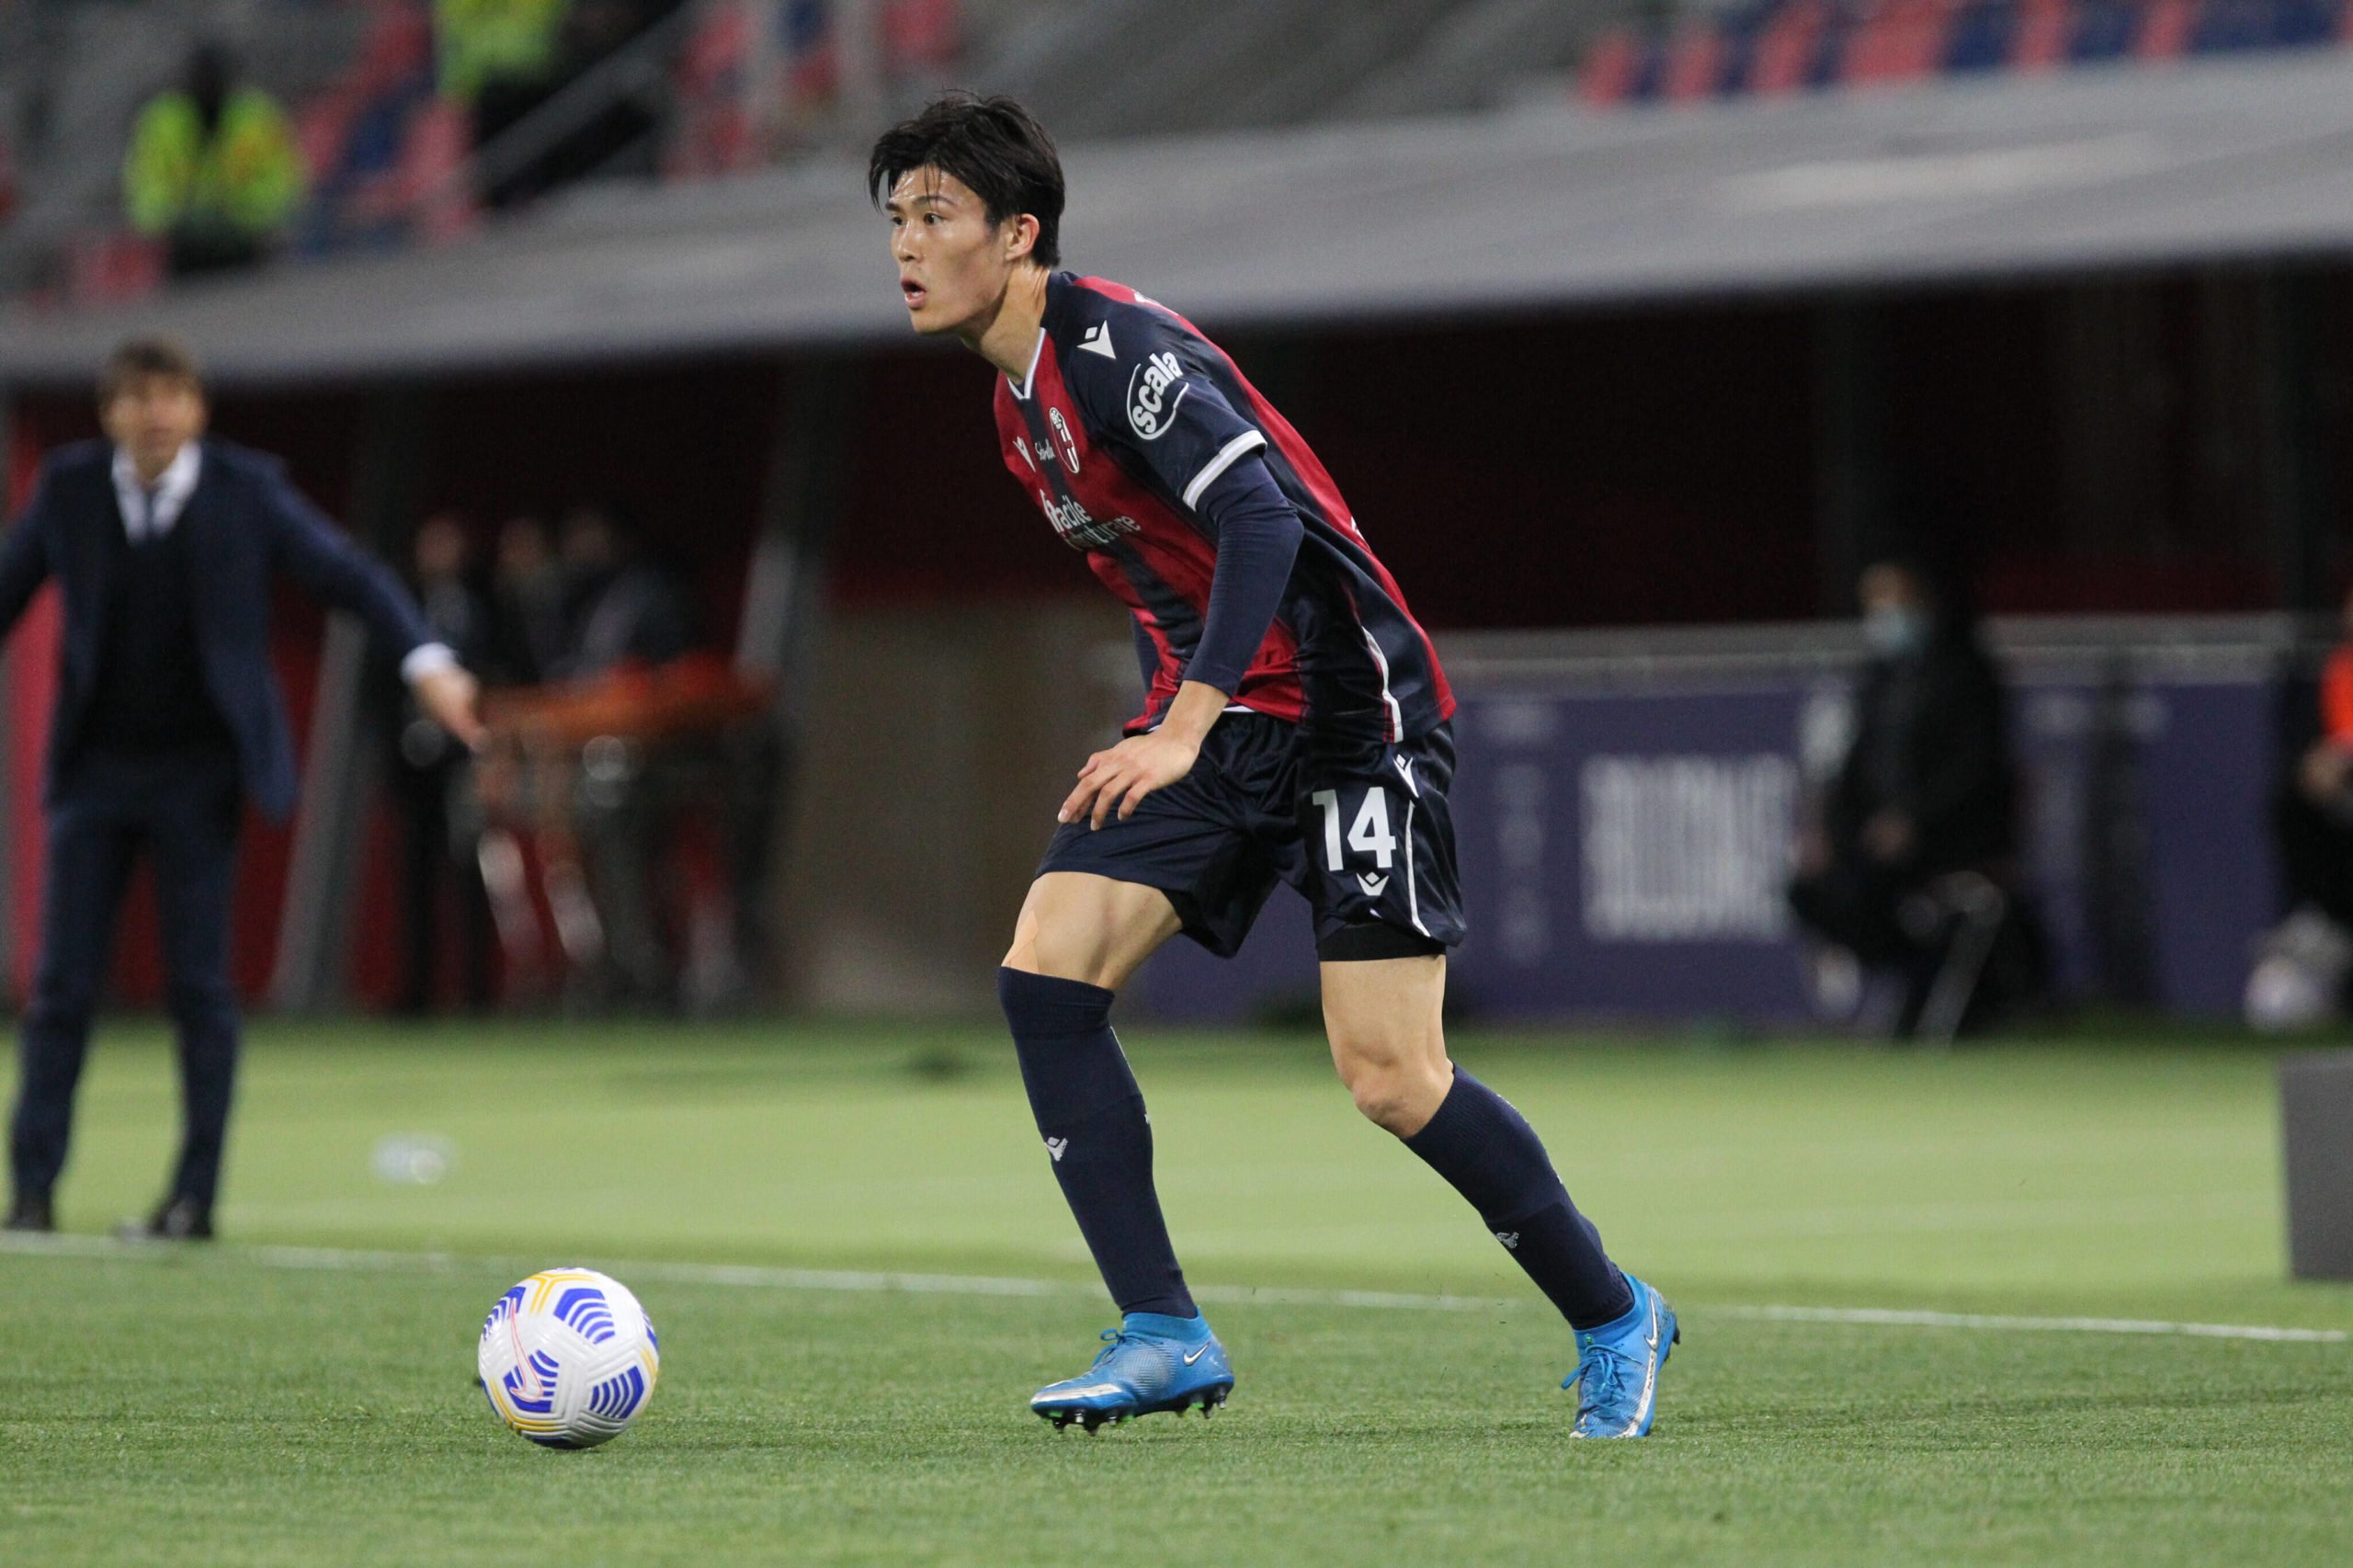 West Ham United eyeing a move for Tomiyasu who is seen in the photo